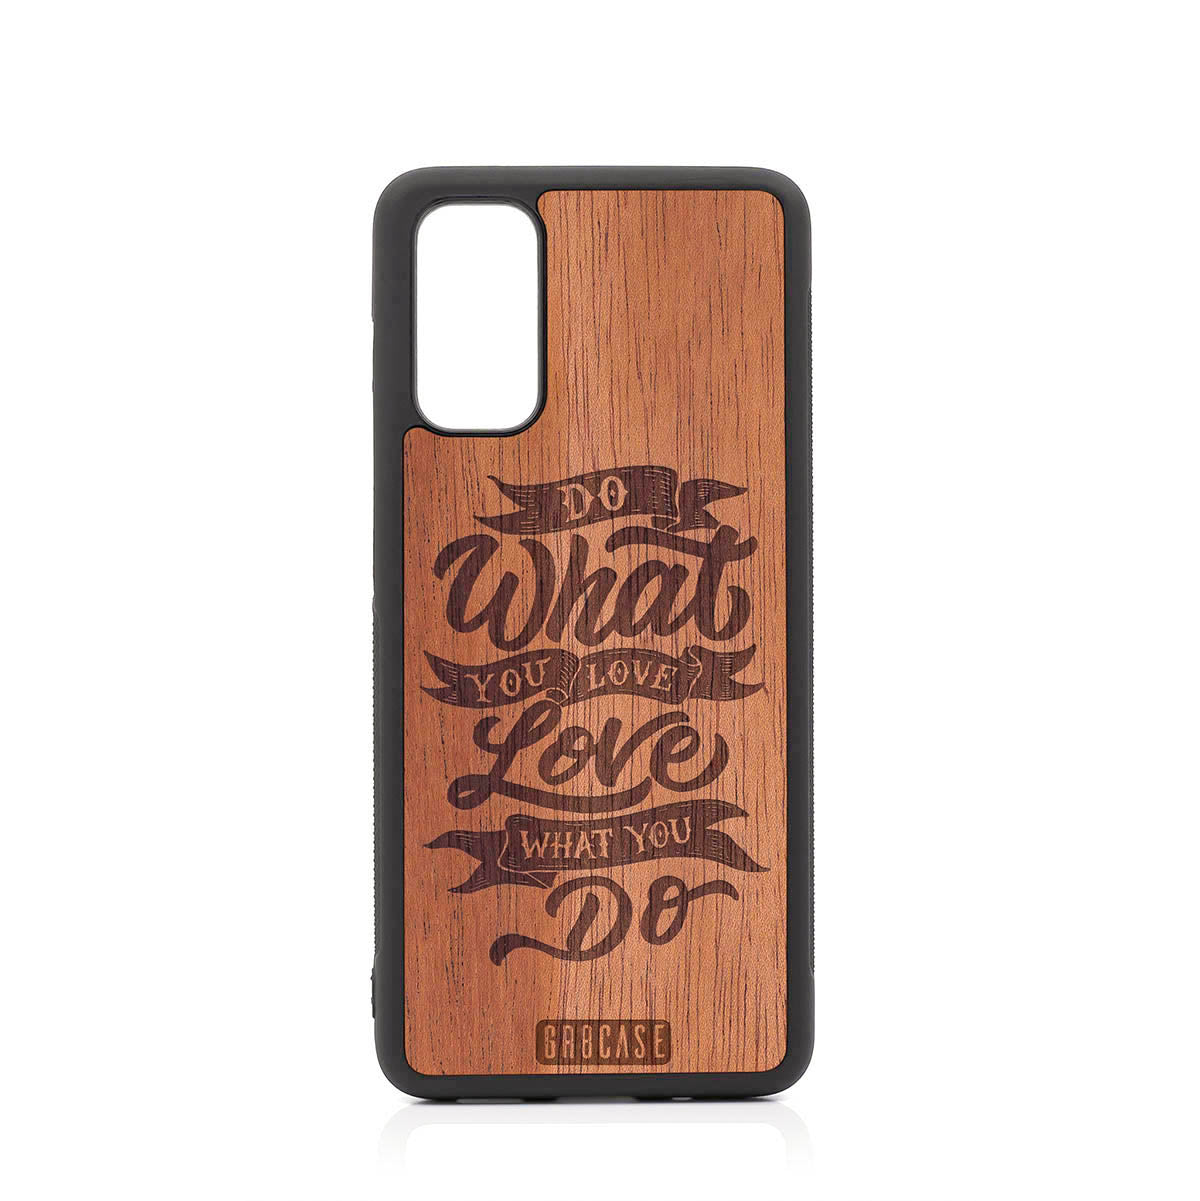 Do What You Love Love What You Do Design Wood Case For Samsung Galaxy A20 by GR8CASE